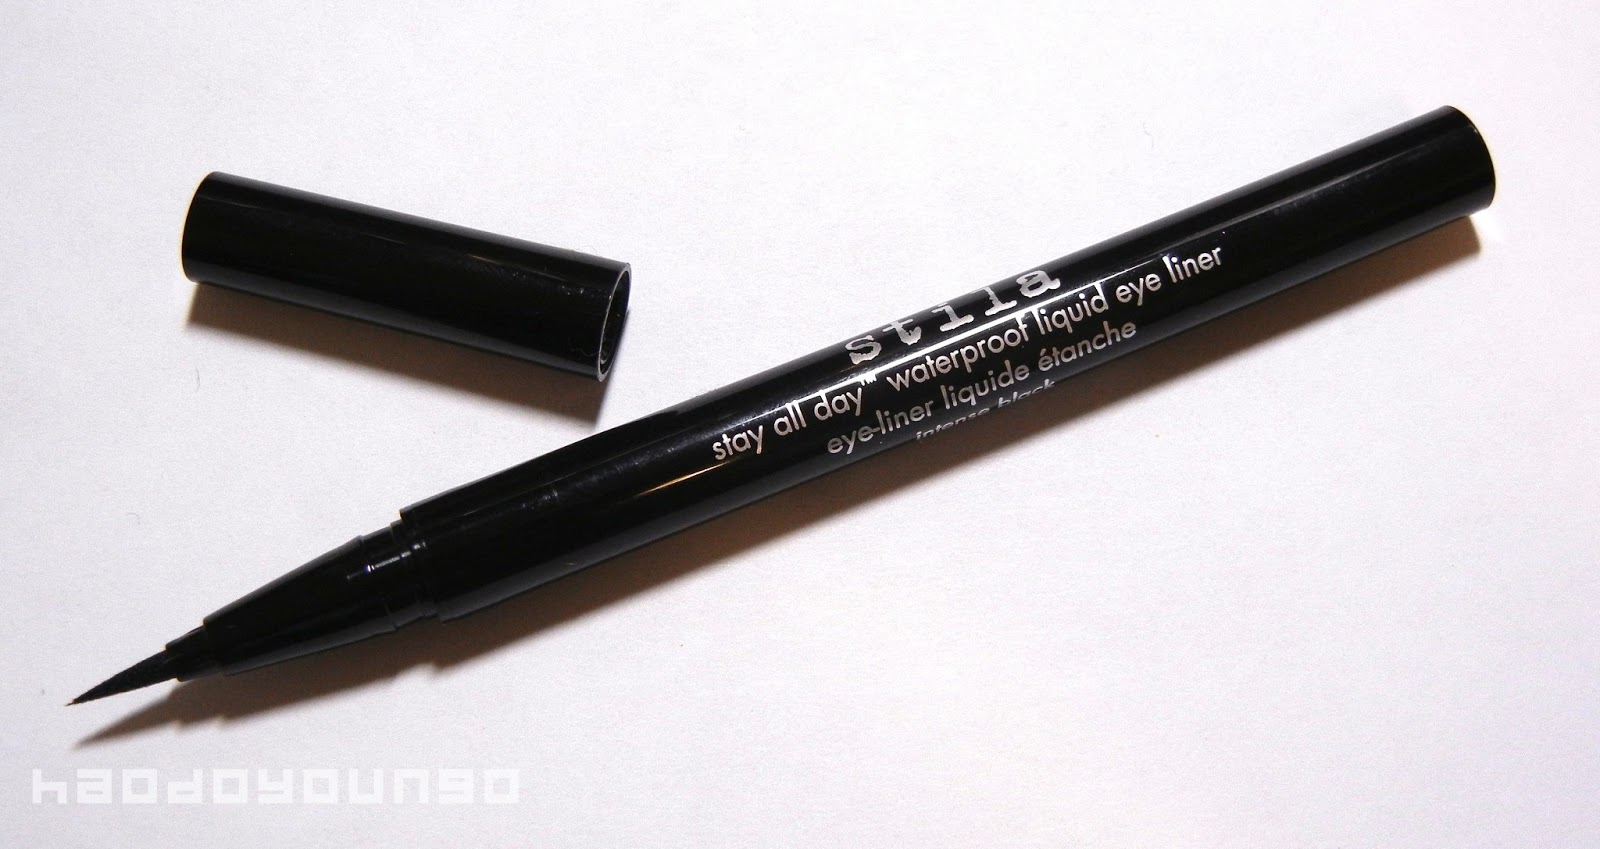 I Tested Stila's Waterproof Liquid Eyeliner and It Didn't Smudge Once